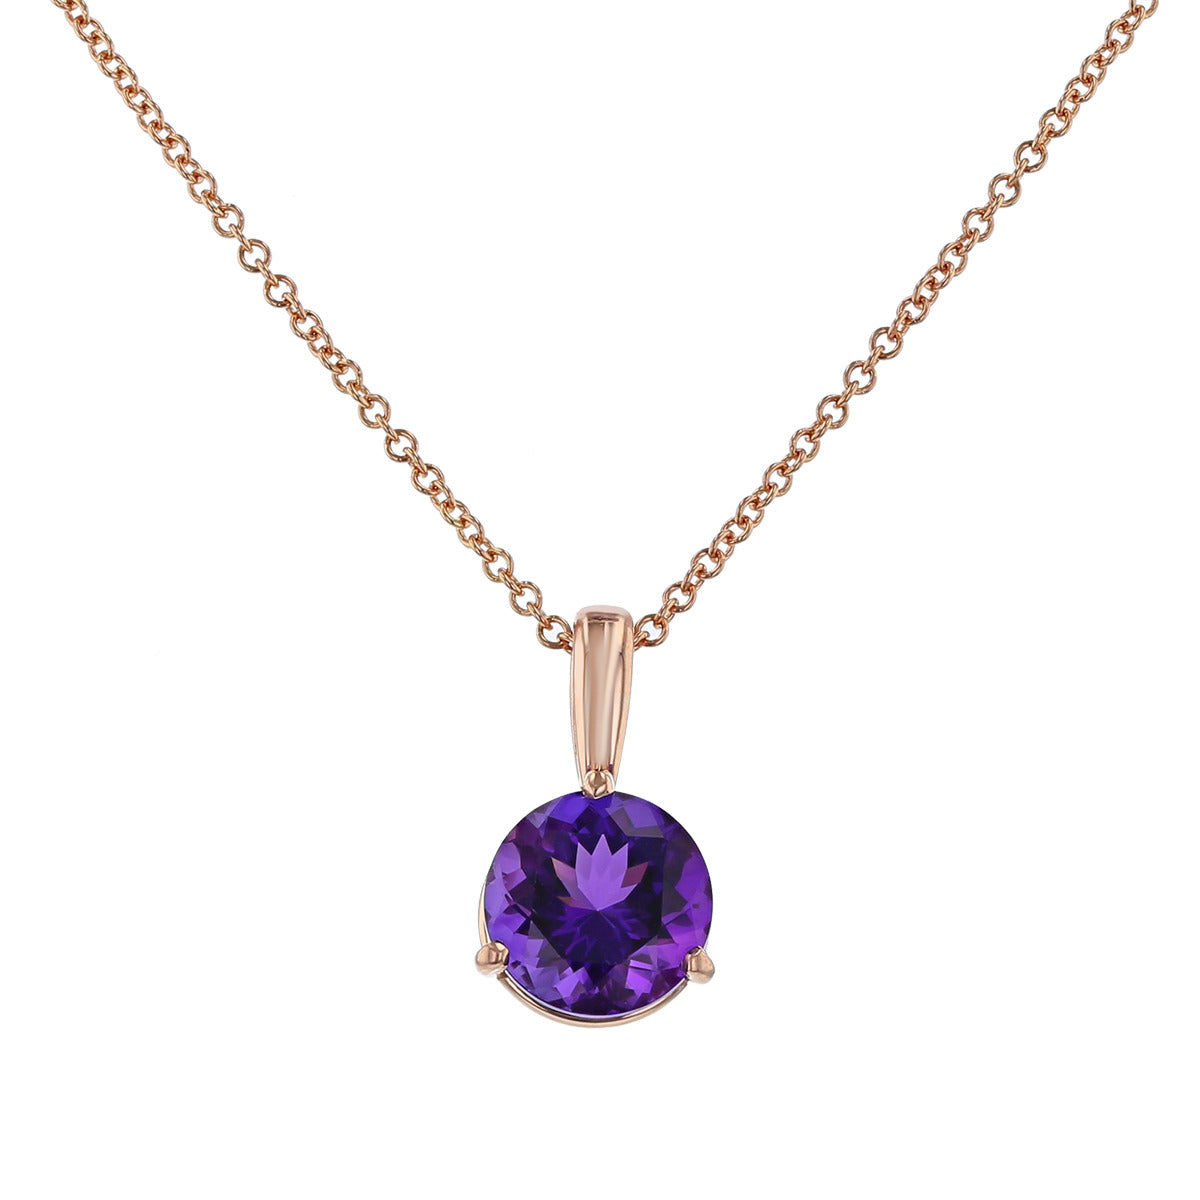 7.03 mm Amethyst Necklace in Rose Gold | Shane Co.